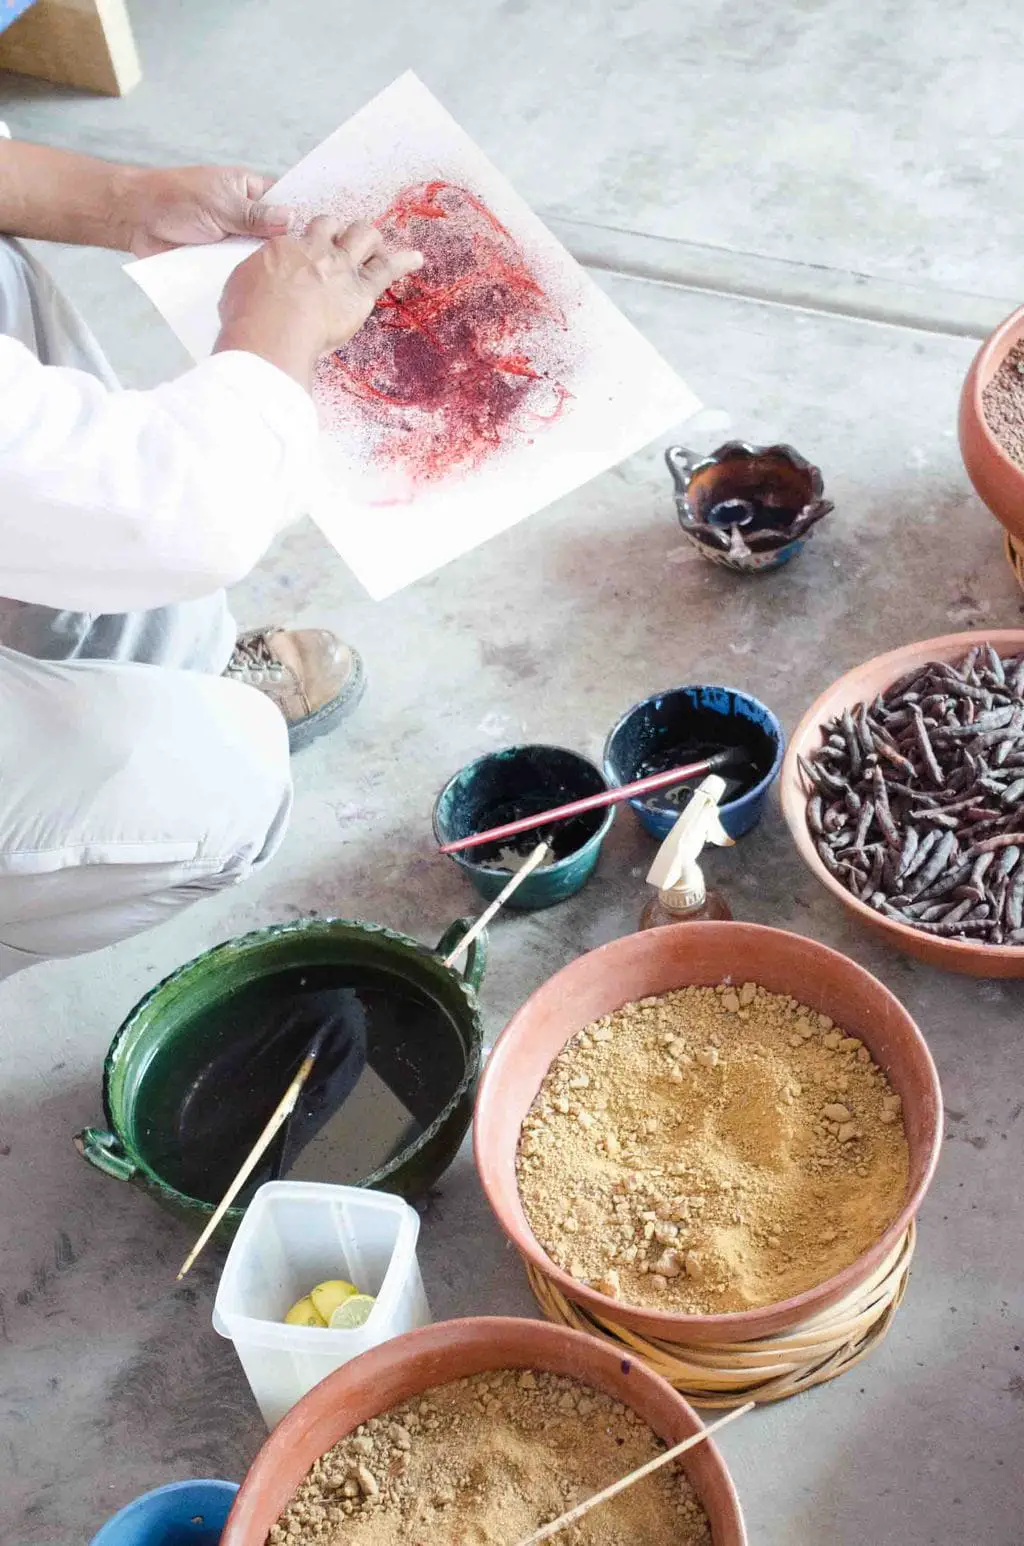 Natural plant dyes in Oaxaca, Mexico